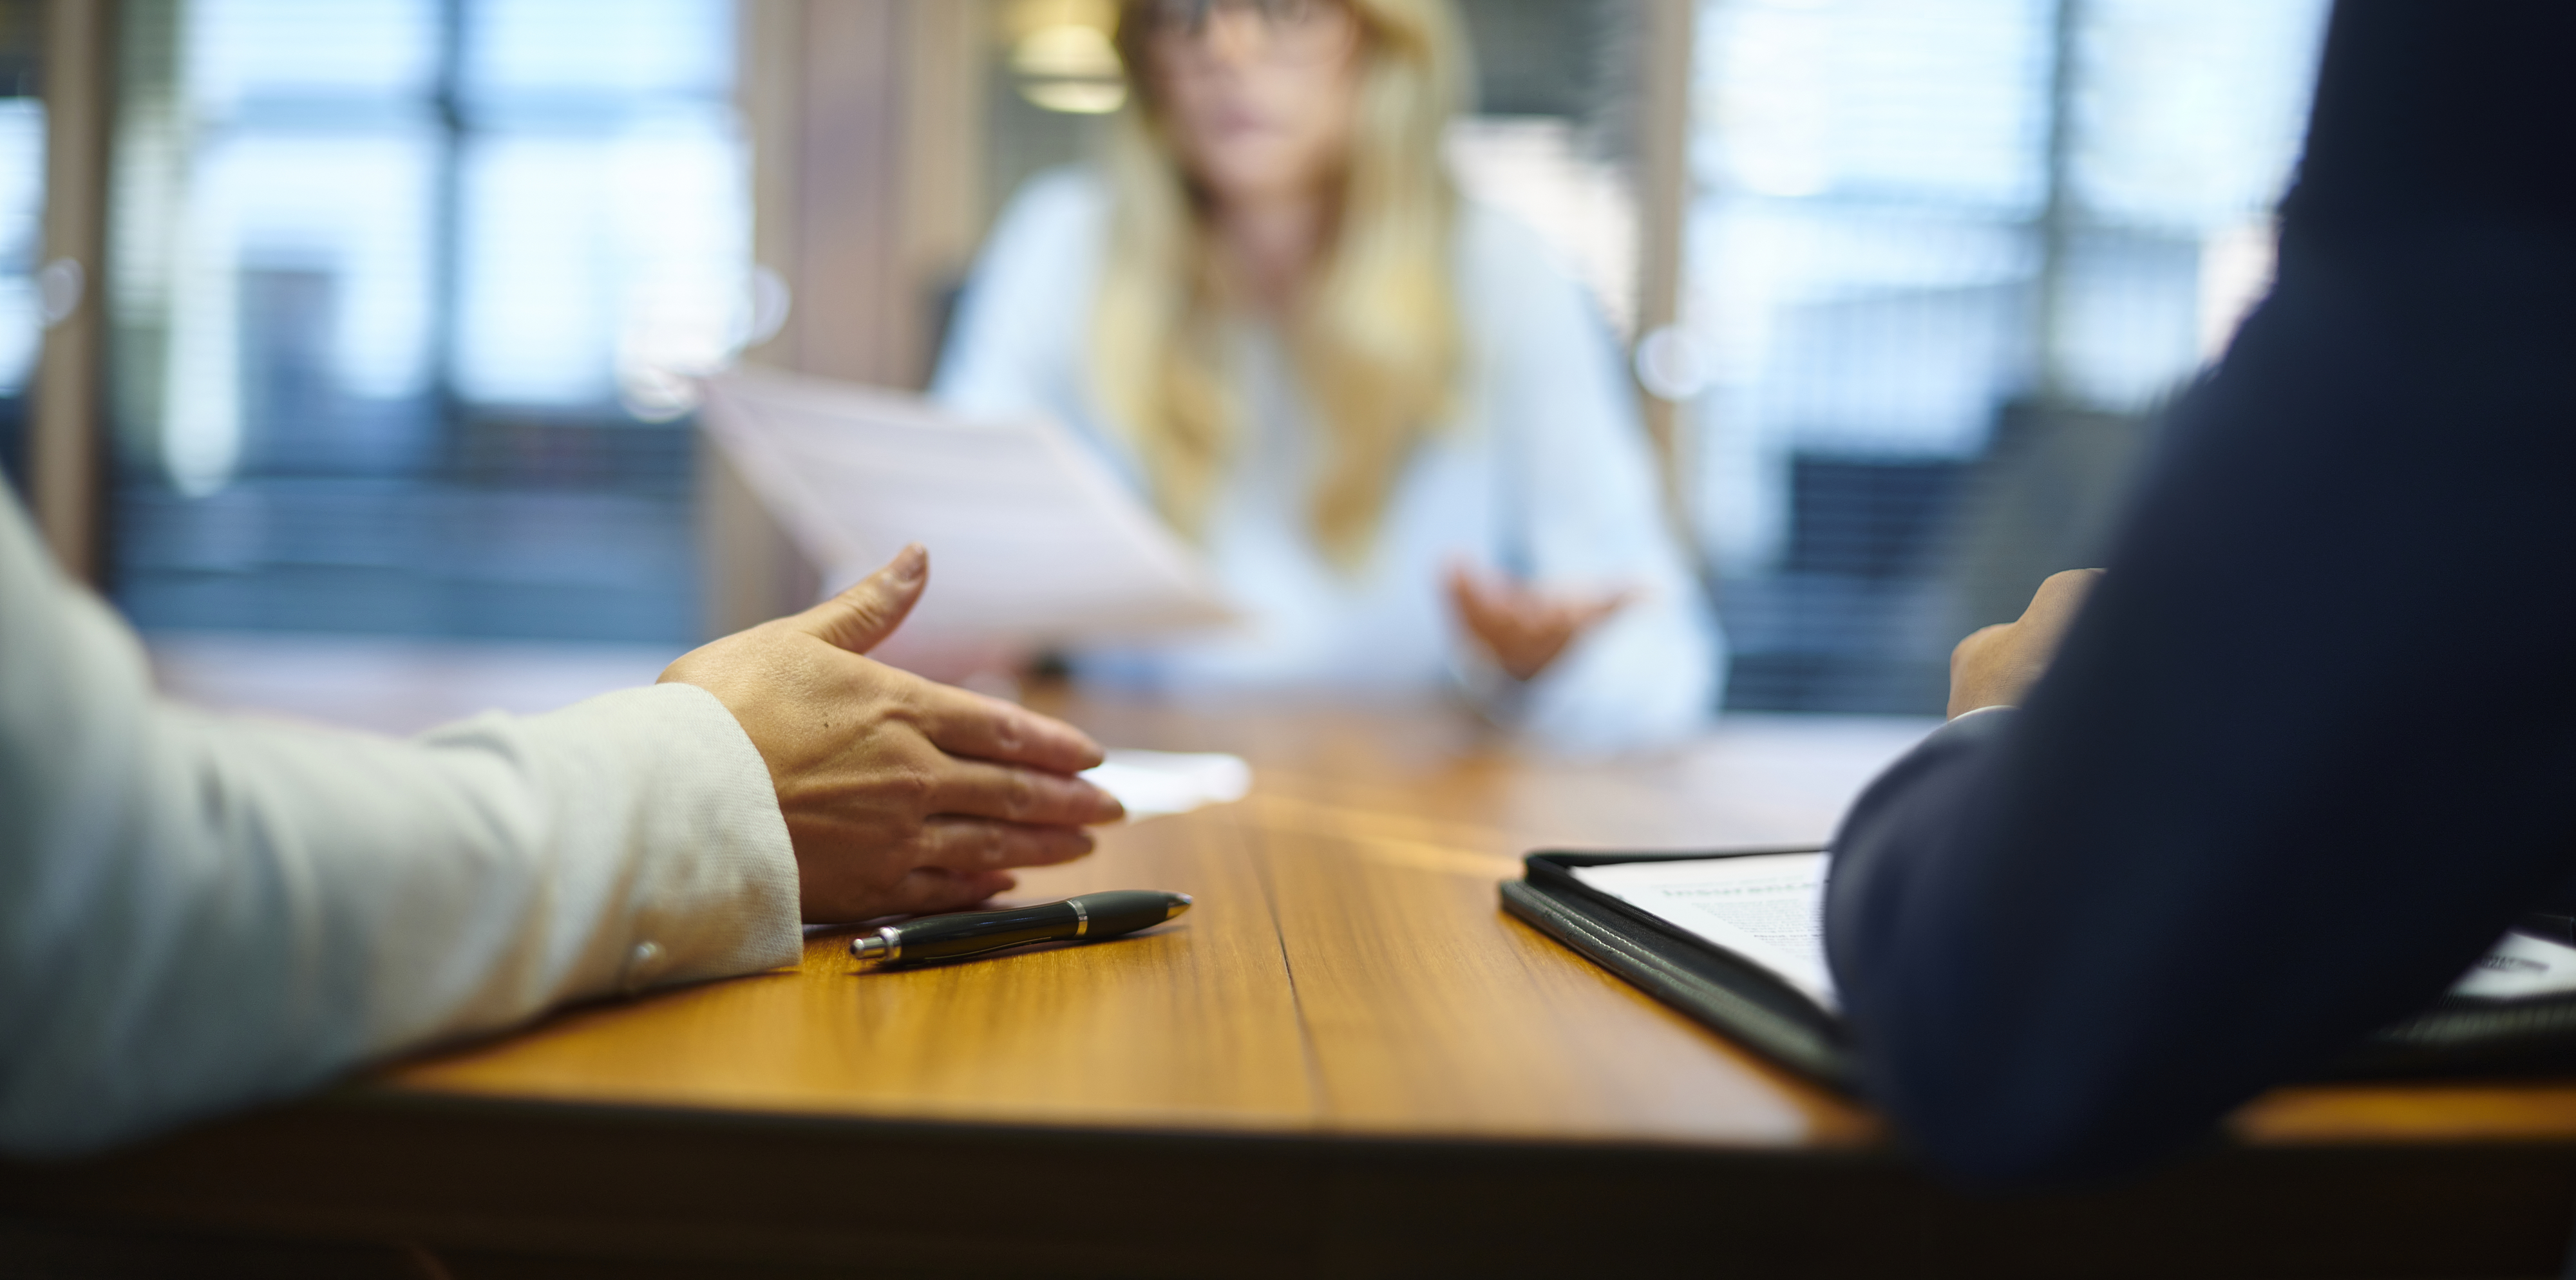 Three people are sitting around a conference table, engaged in a discussion. Out-of-focus blurry background denotes an office setting